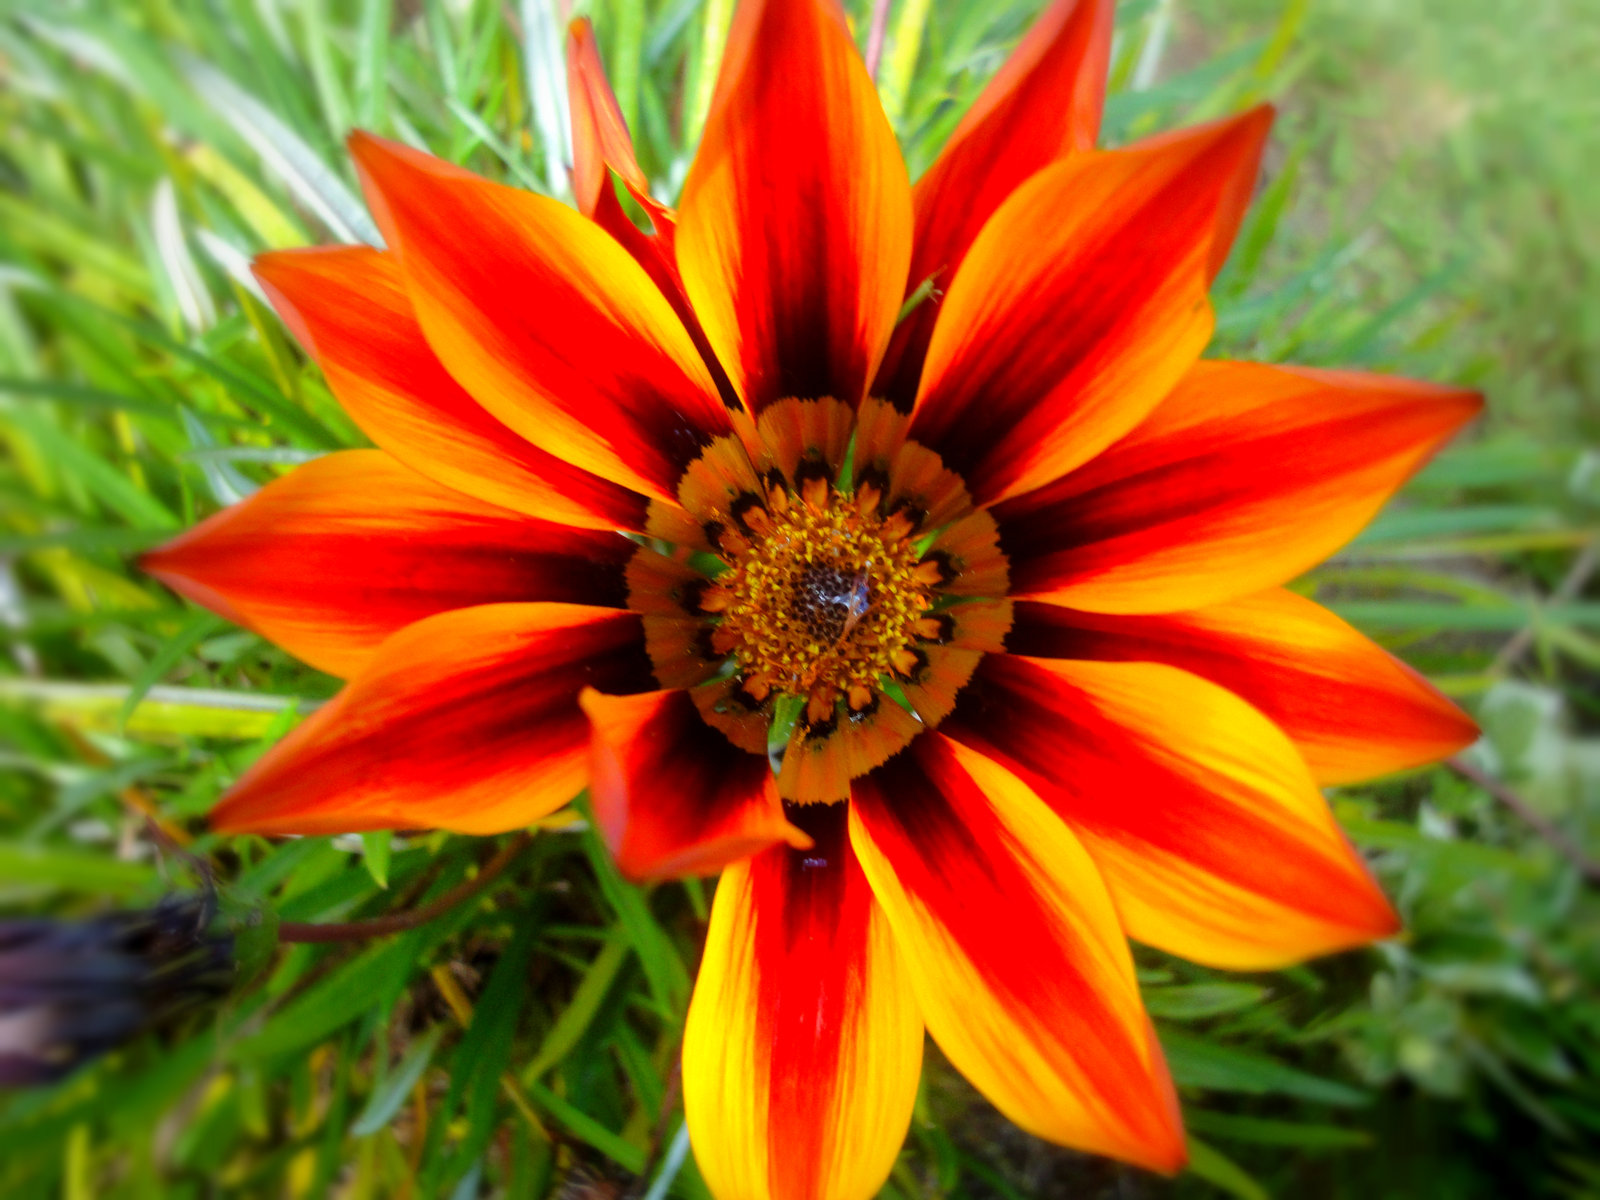 Red-Orange Flower (Name unknown, sorry!) by ICanSpellPotatoe on ...